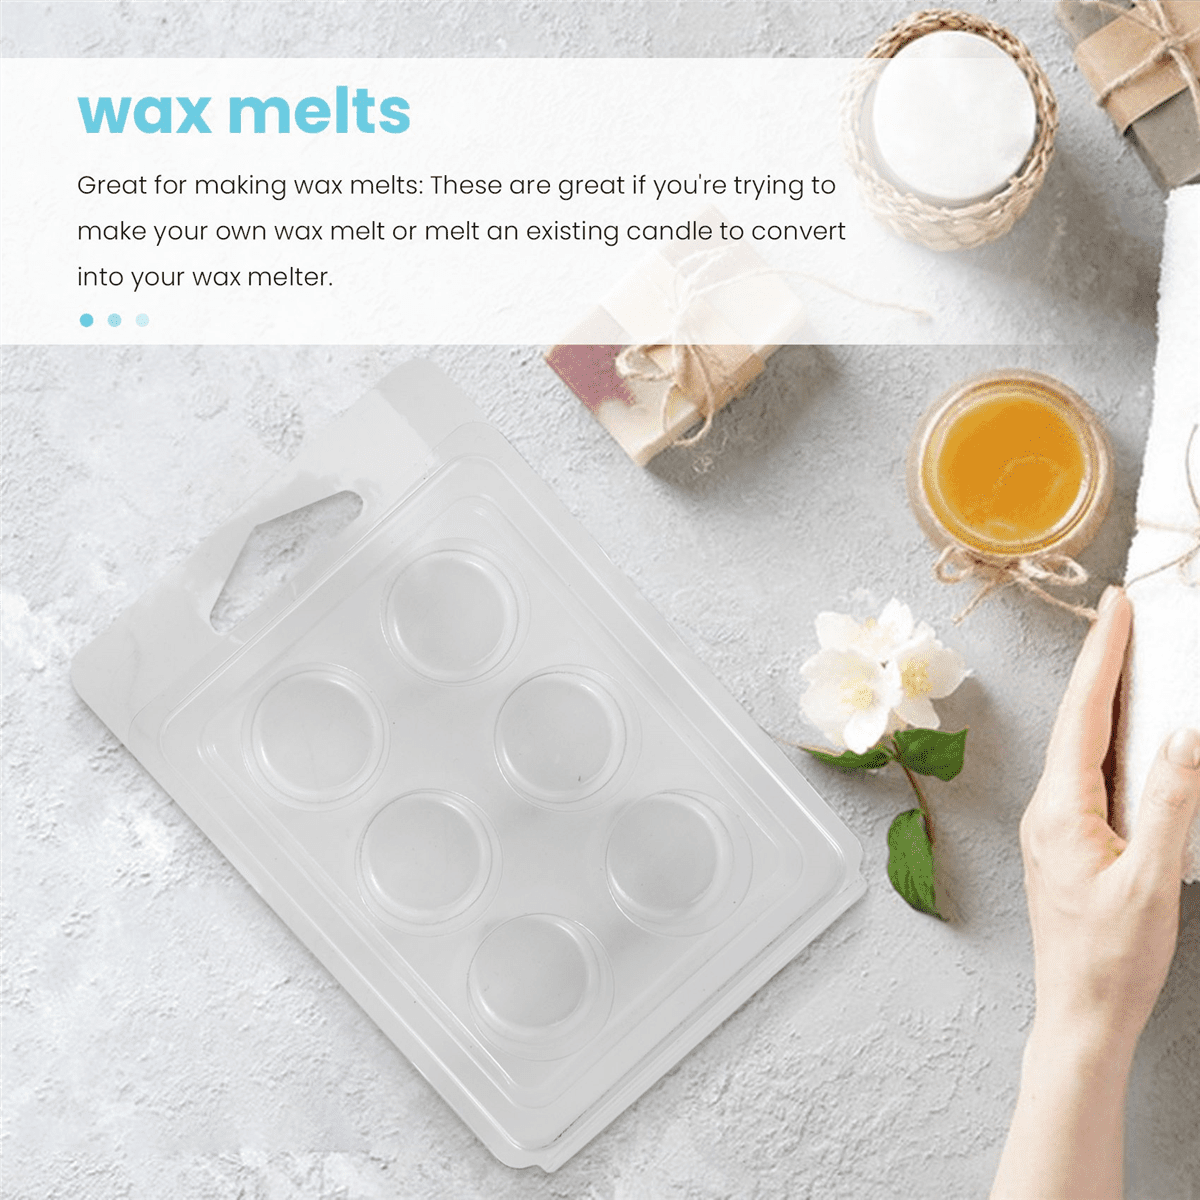 60 Pack Wax Melt Containers-6 Cavity Clear Empty Plastic Wax Melt -  Clamshells for Tarts Wax Melts. 